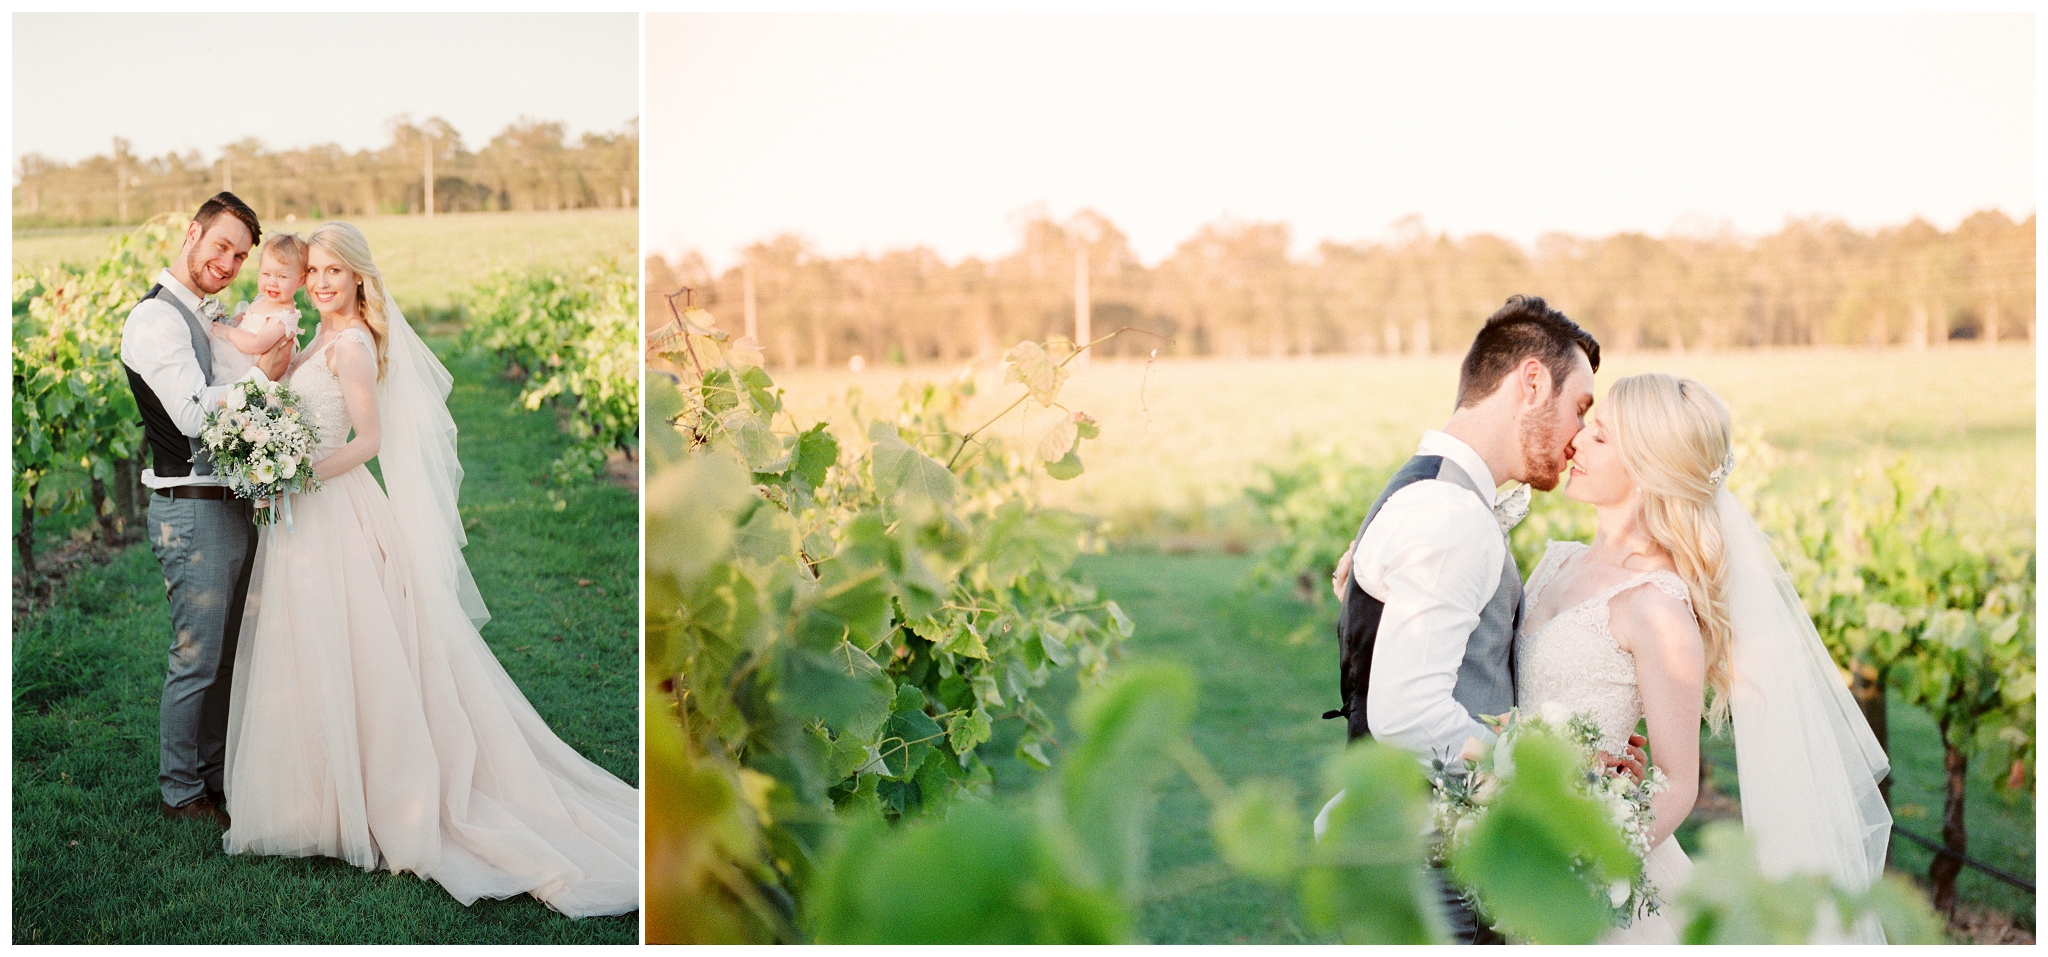 Tegan and Alex Wedding at Albert River Wines by Casey Jane Photography 66